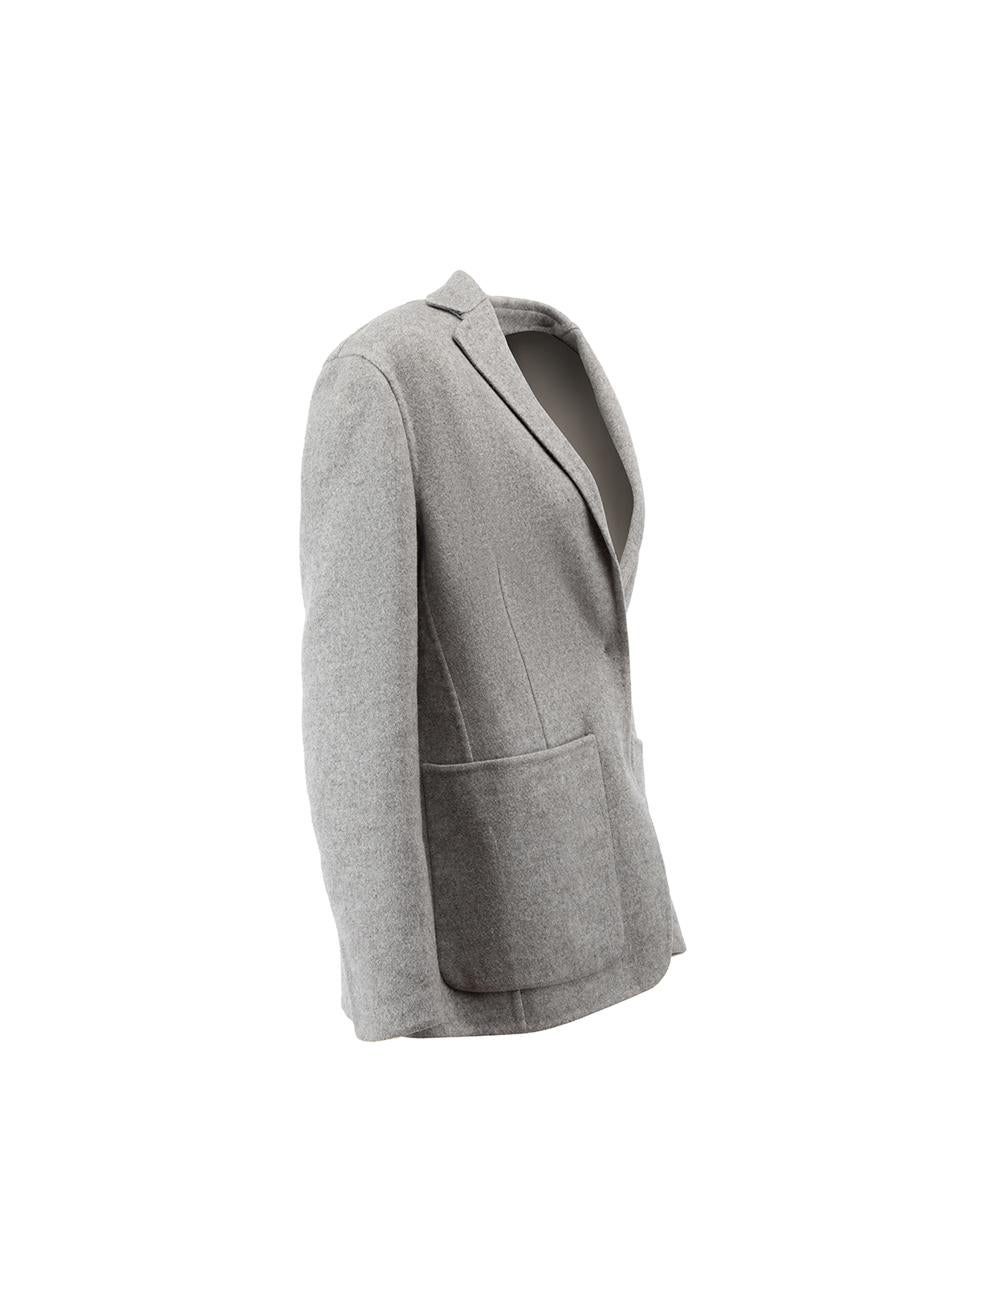 CONDITION is Good. Minor wear to blazer is evident. Light wear to seams with loose threads and small splits found at the lapel, pockets, cuff lining and internal centre back dart on this used Céline designer resale